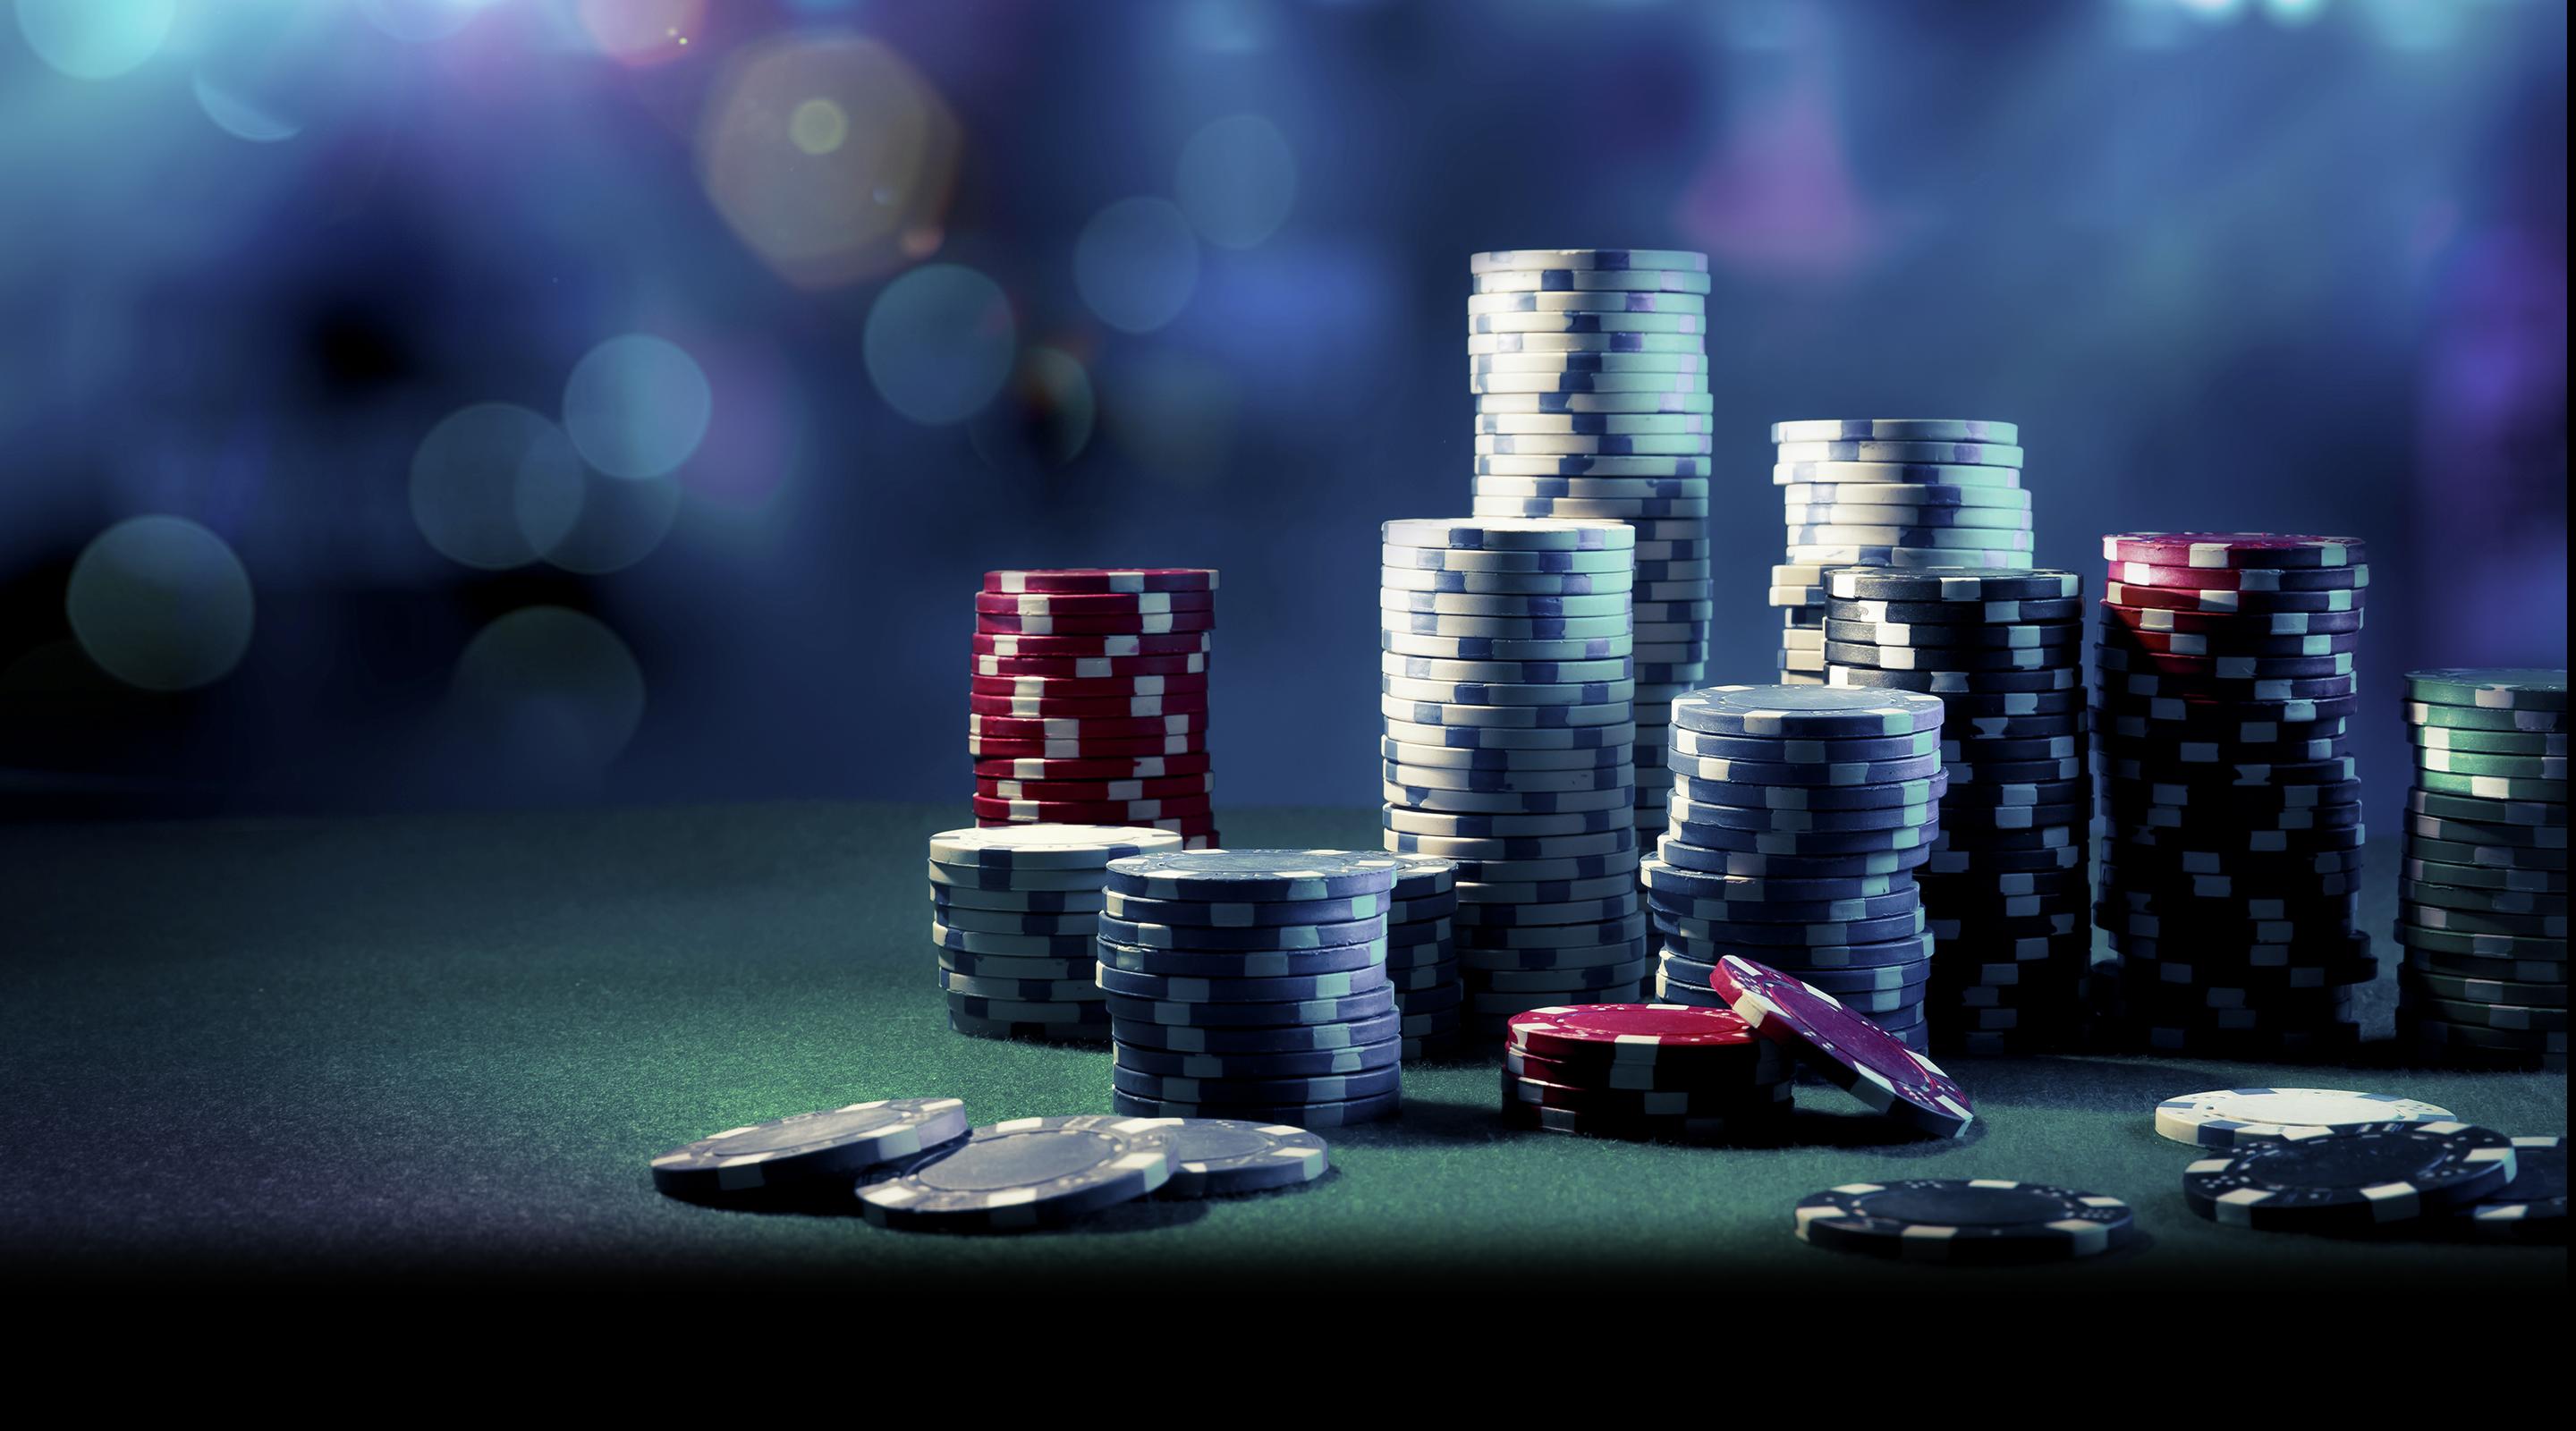 Poker wallpapers, Game, HQ Poker pictures | 4K Wallpapers 2019